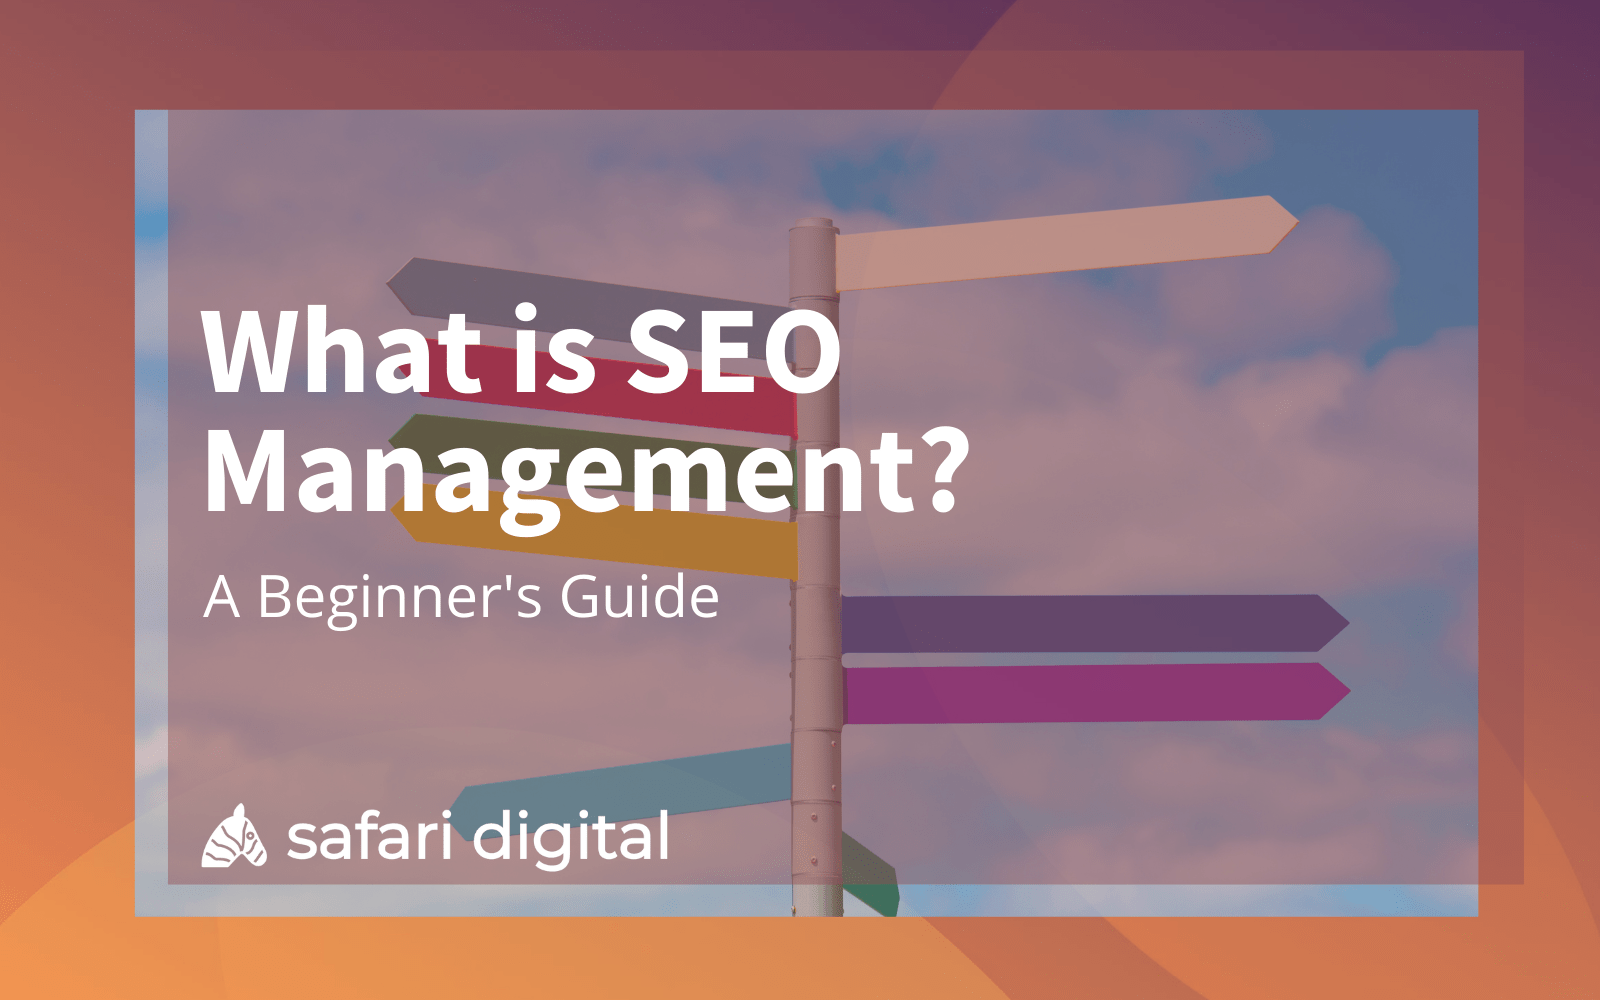 what is SEO Management? (article cover image)